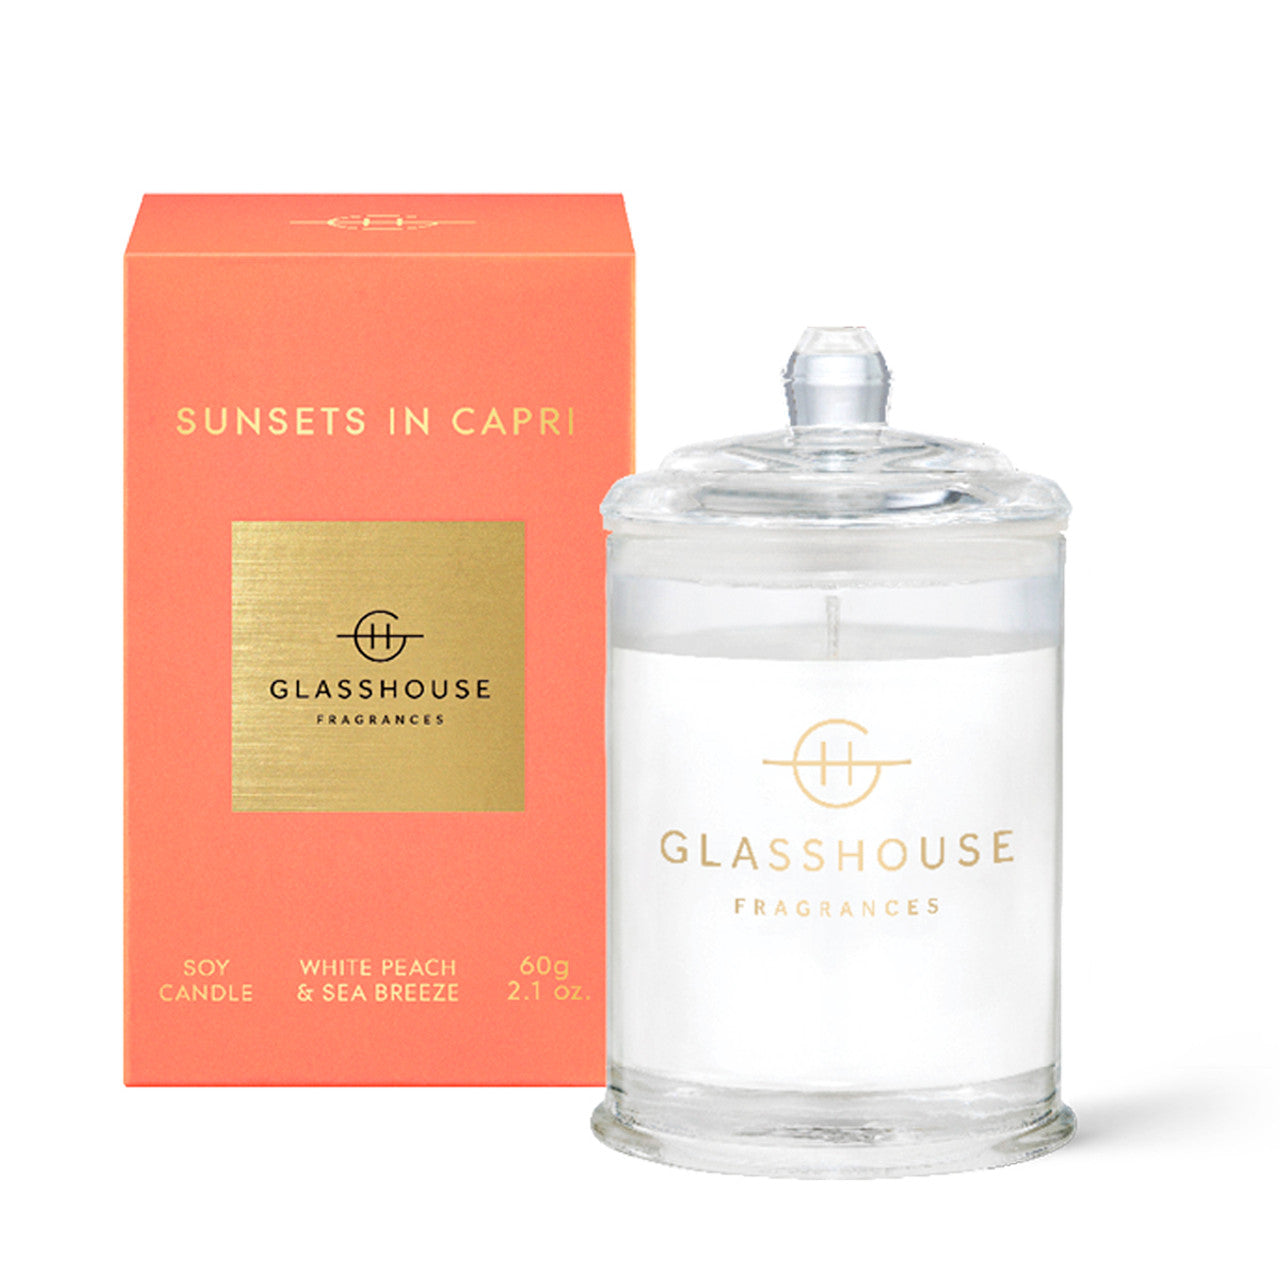 Glasshouse "Sunsets in Capri" Soy Candle